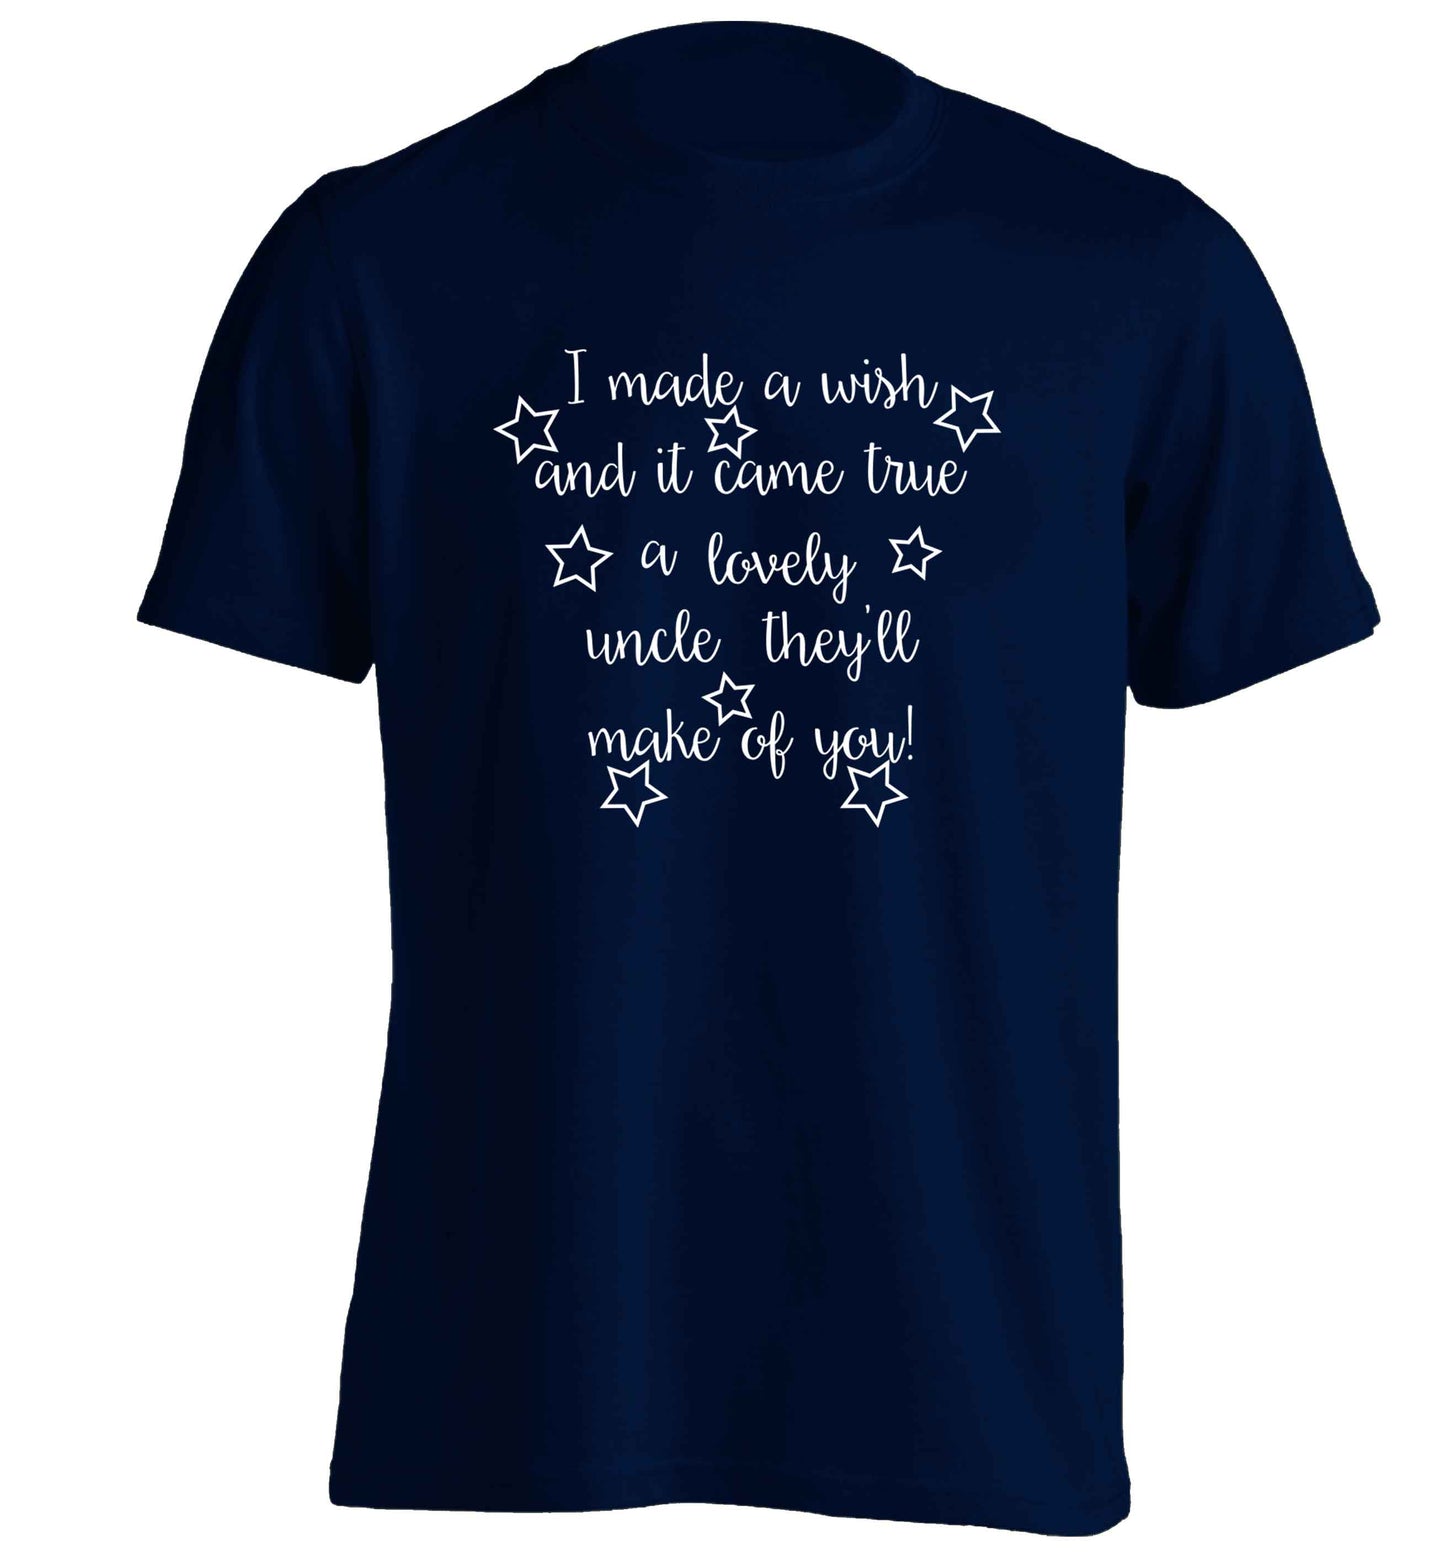 I made a wish and it came true a lovely uncle they'll make of you! adults unisex navy Tshirt 2XL